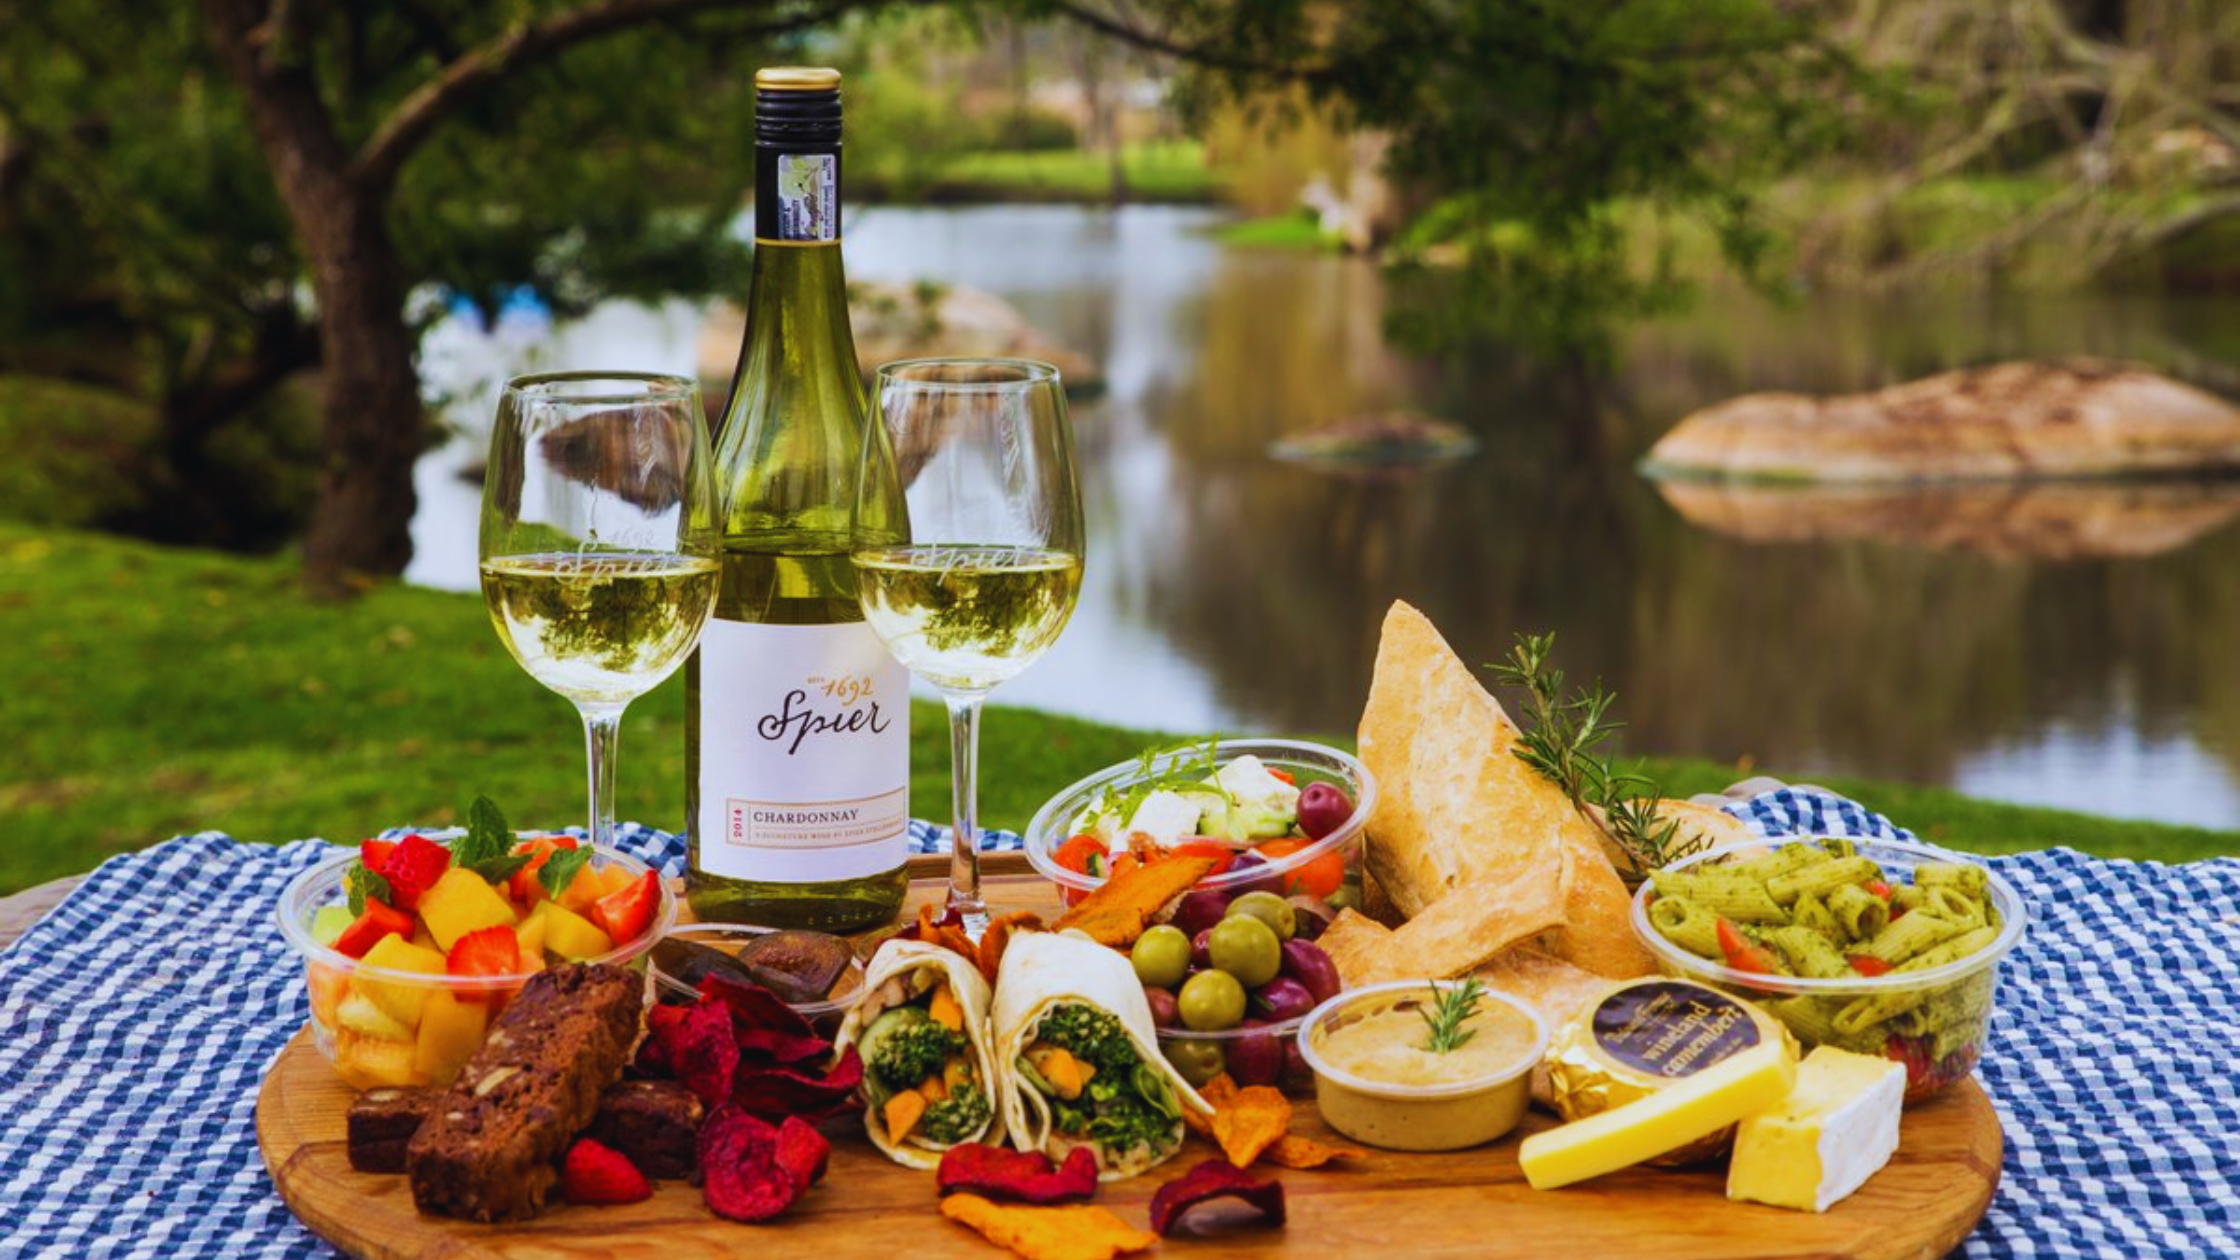 Celebrate with a festive picnic at Spier by signing up to their newsletter to snag one of limited tickets when they launch.